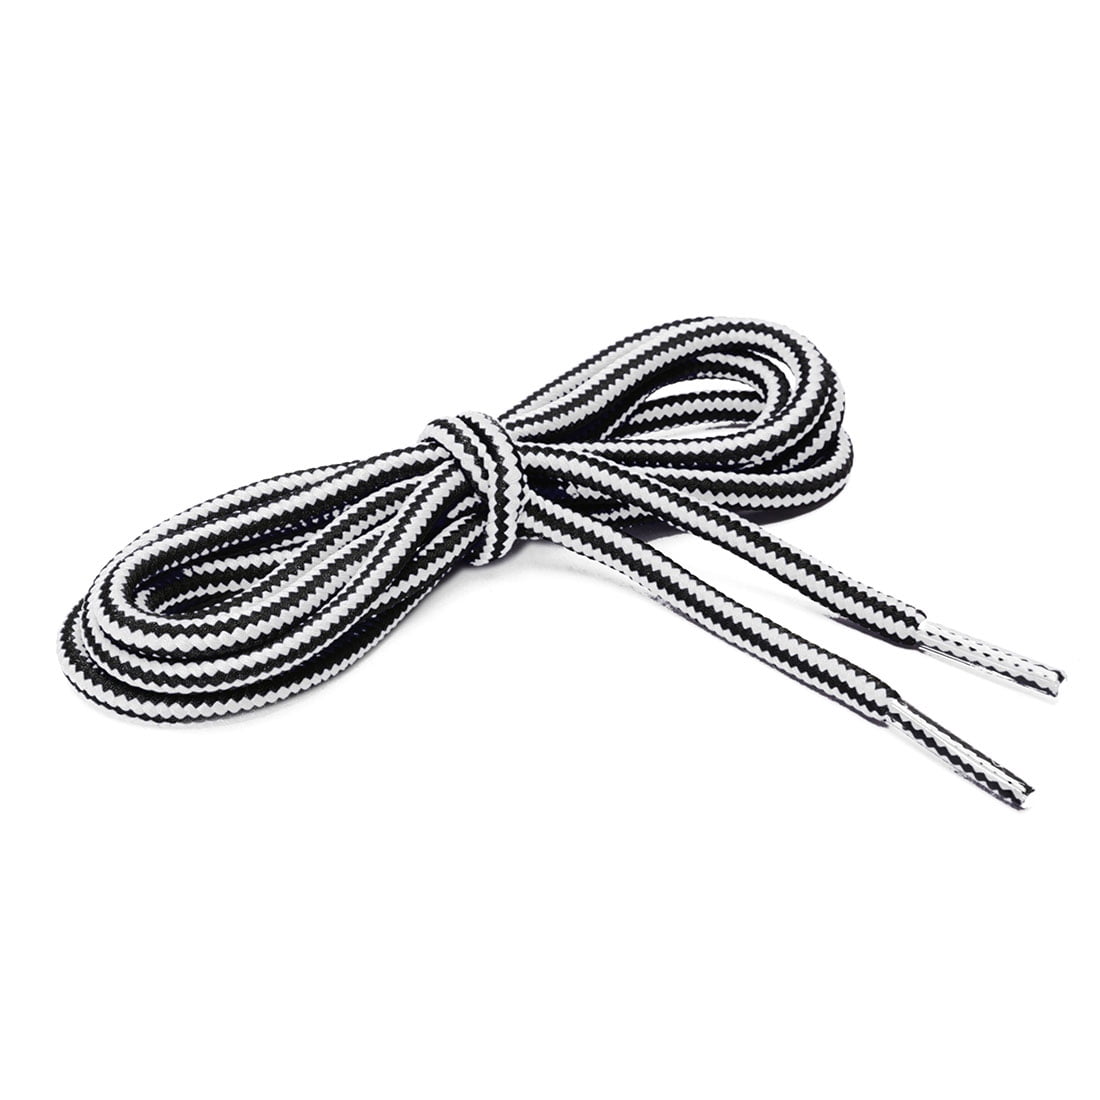 black and white striped laces